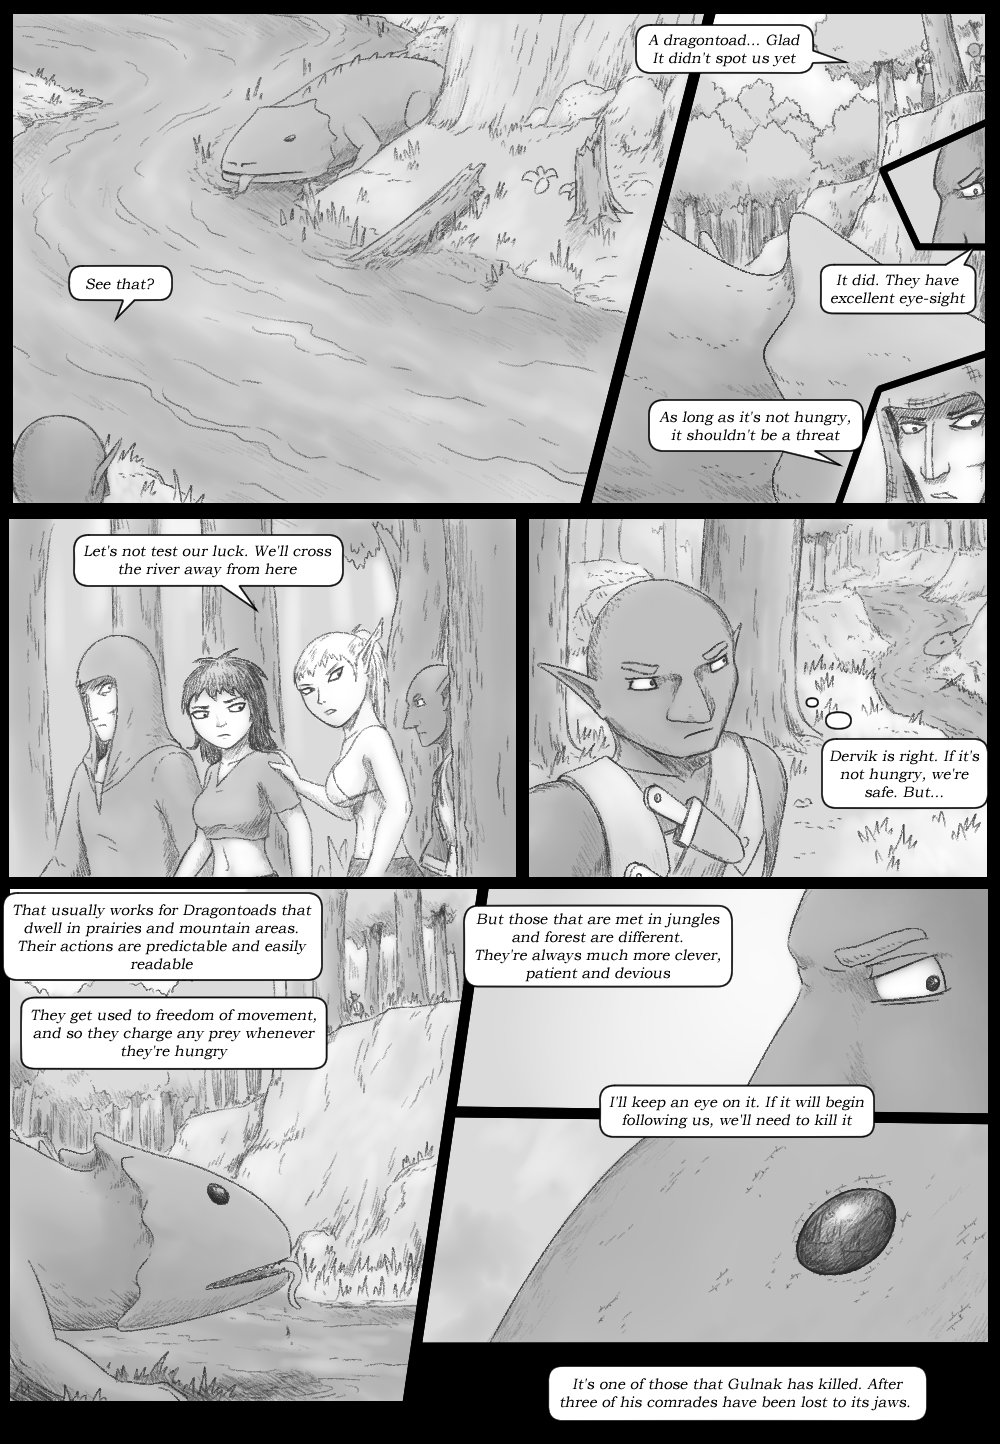 Page 12 - Two Types of a Dragontoad